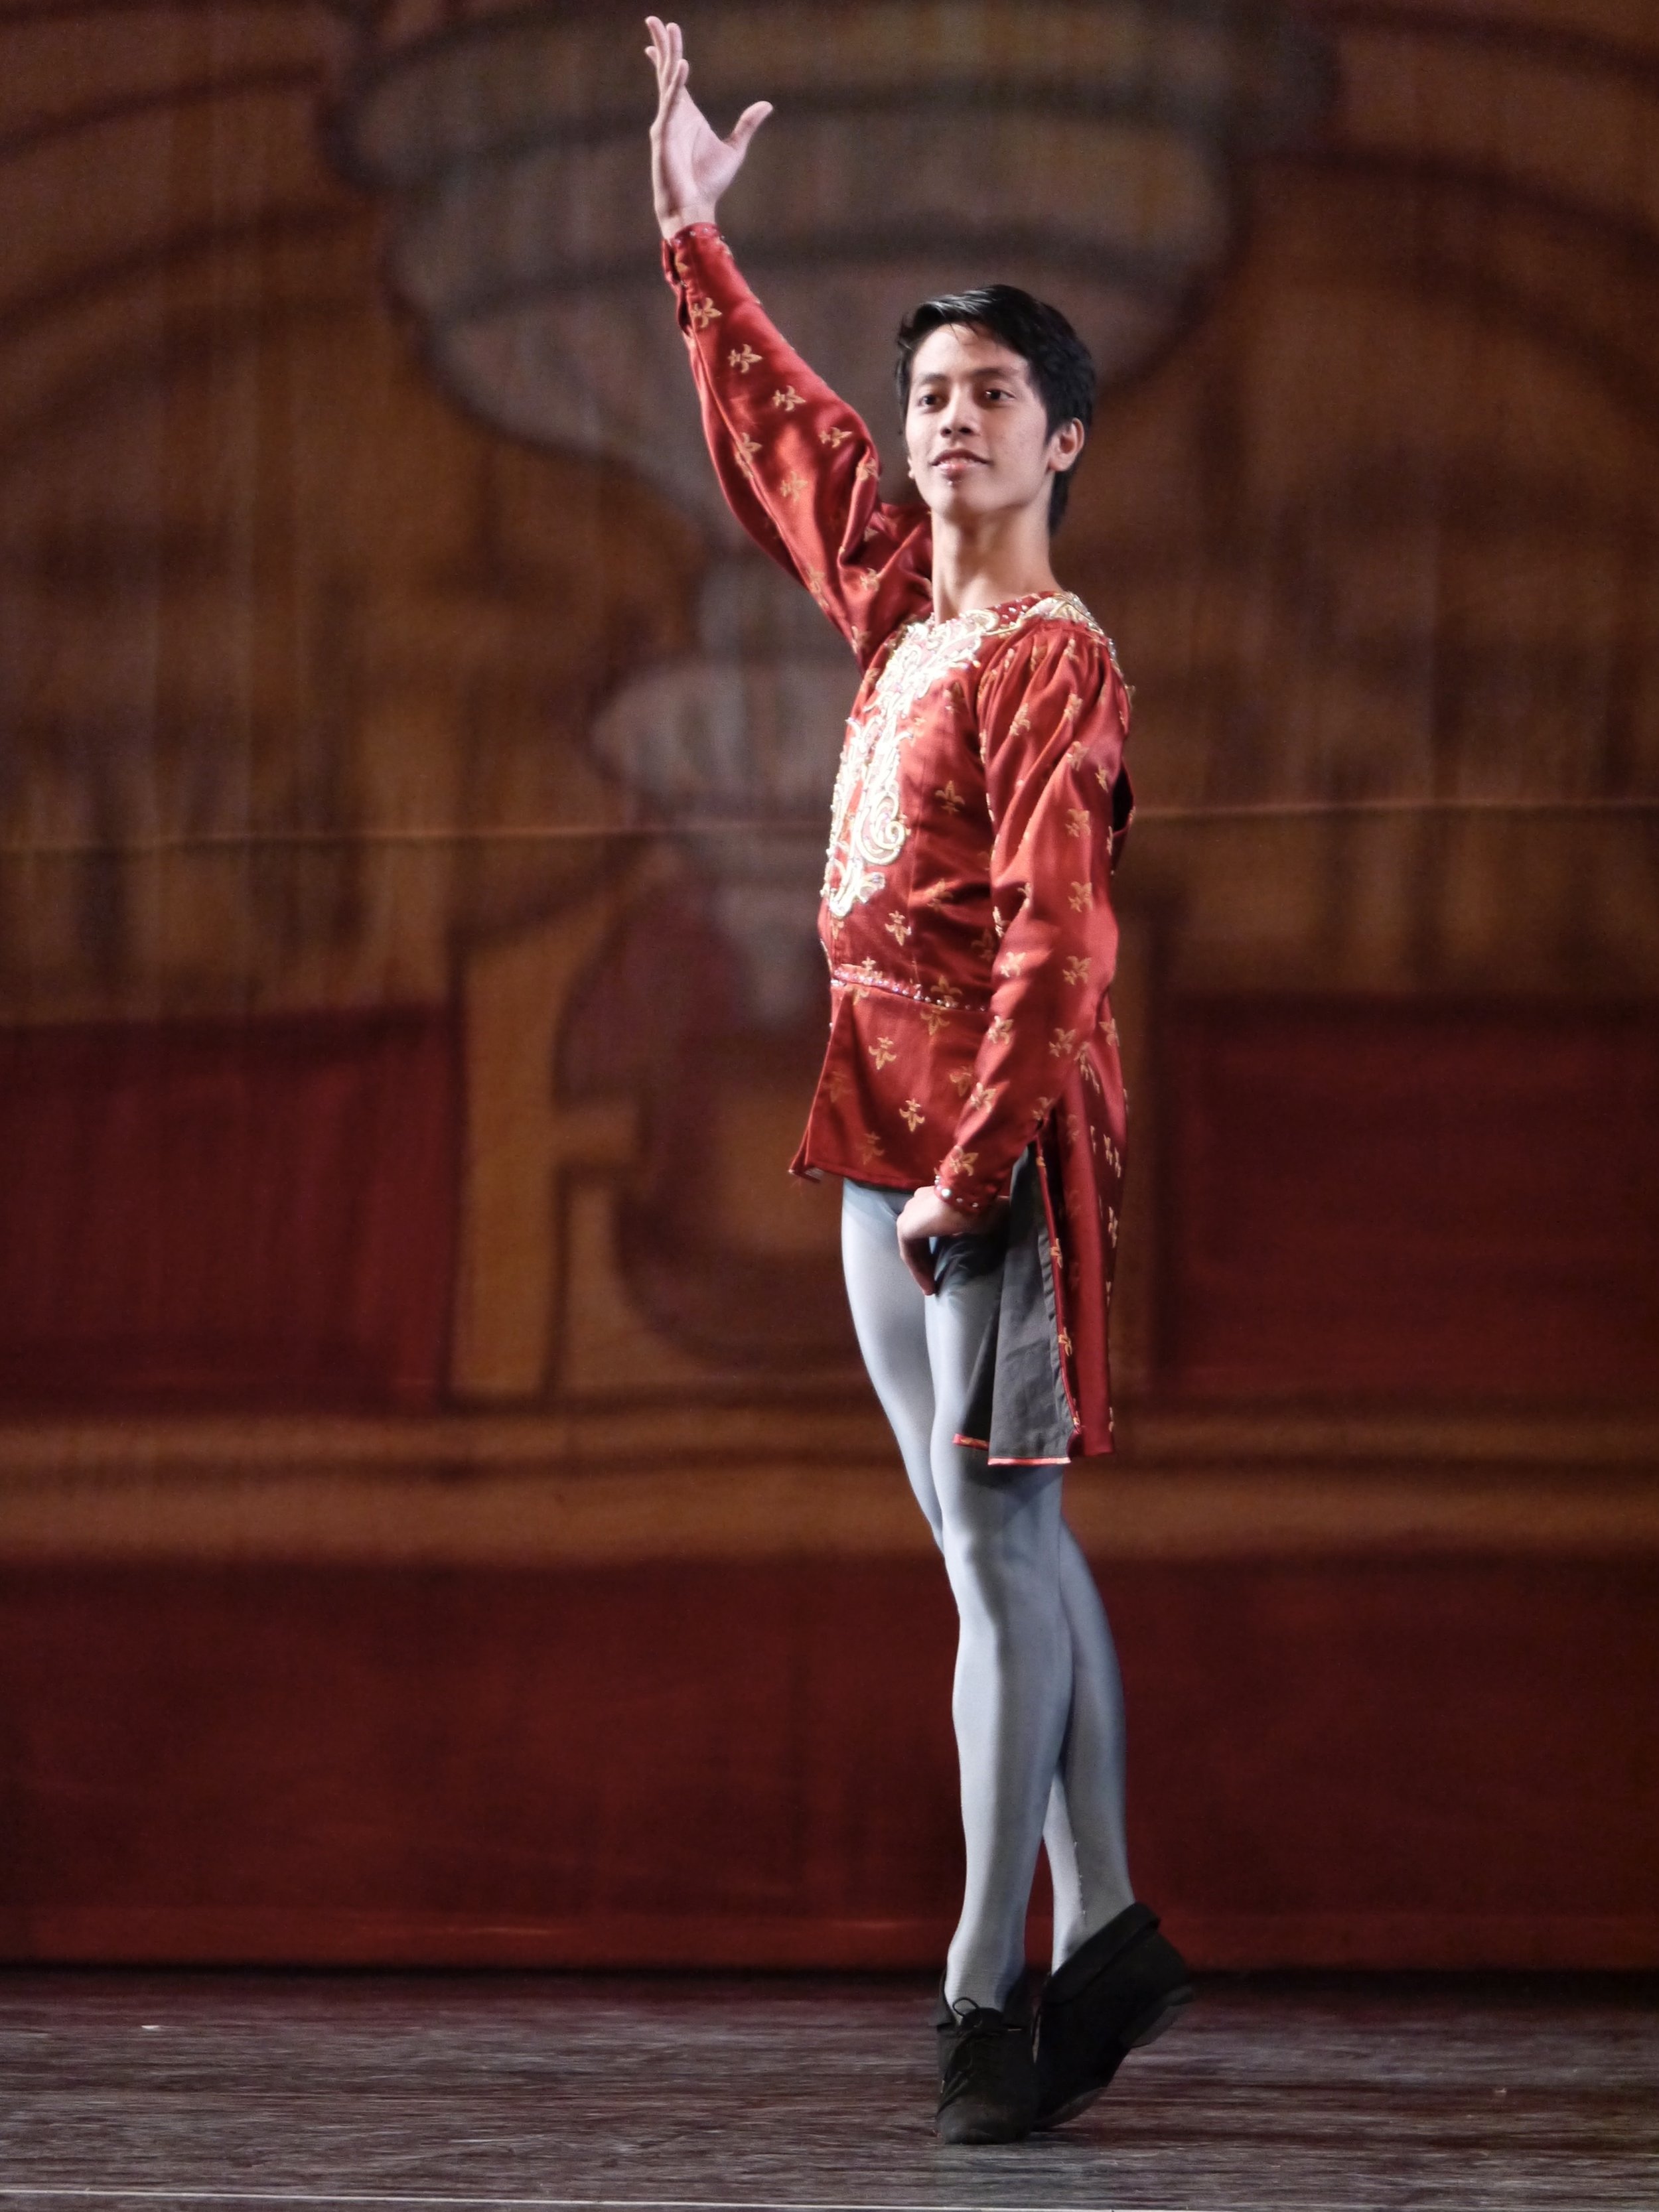    Dancing as one of the cavaliers in  Swan Lake  (2017), Rodney Catubay reflects dignified elegance in red and gray. Photo by Giselle P. Kasilag   